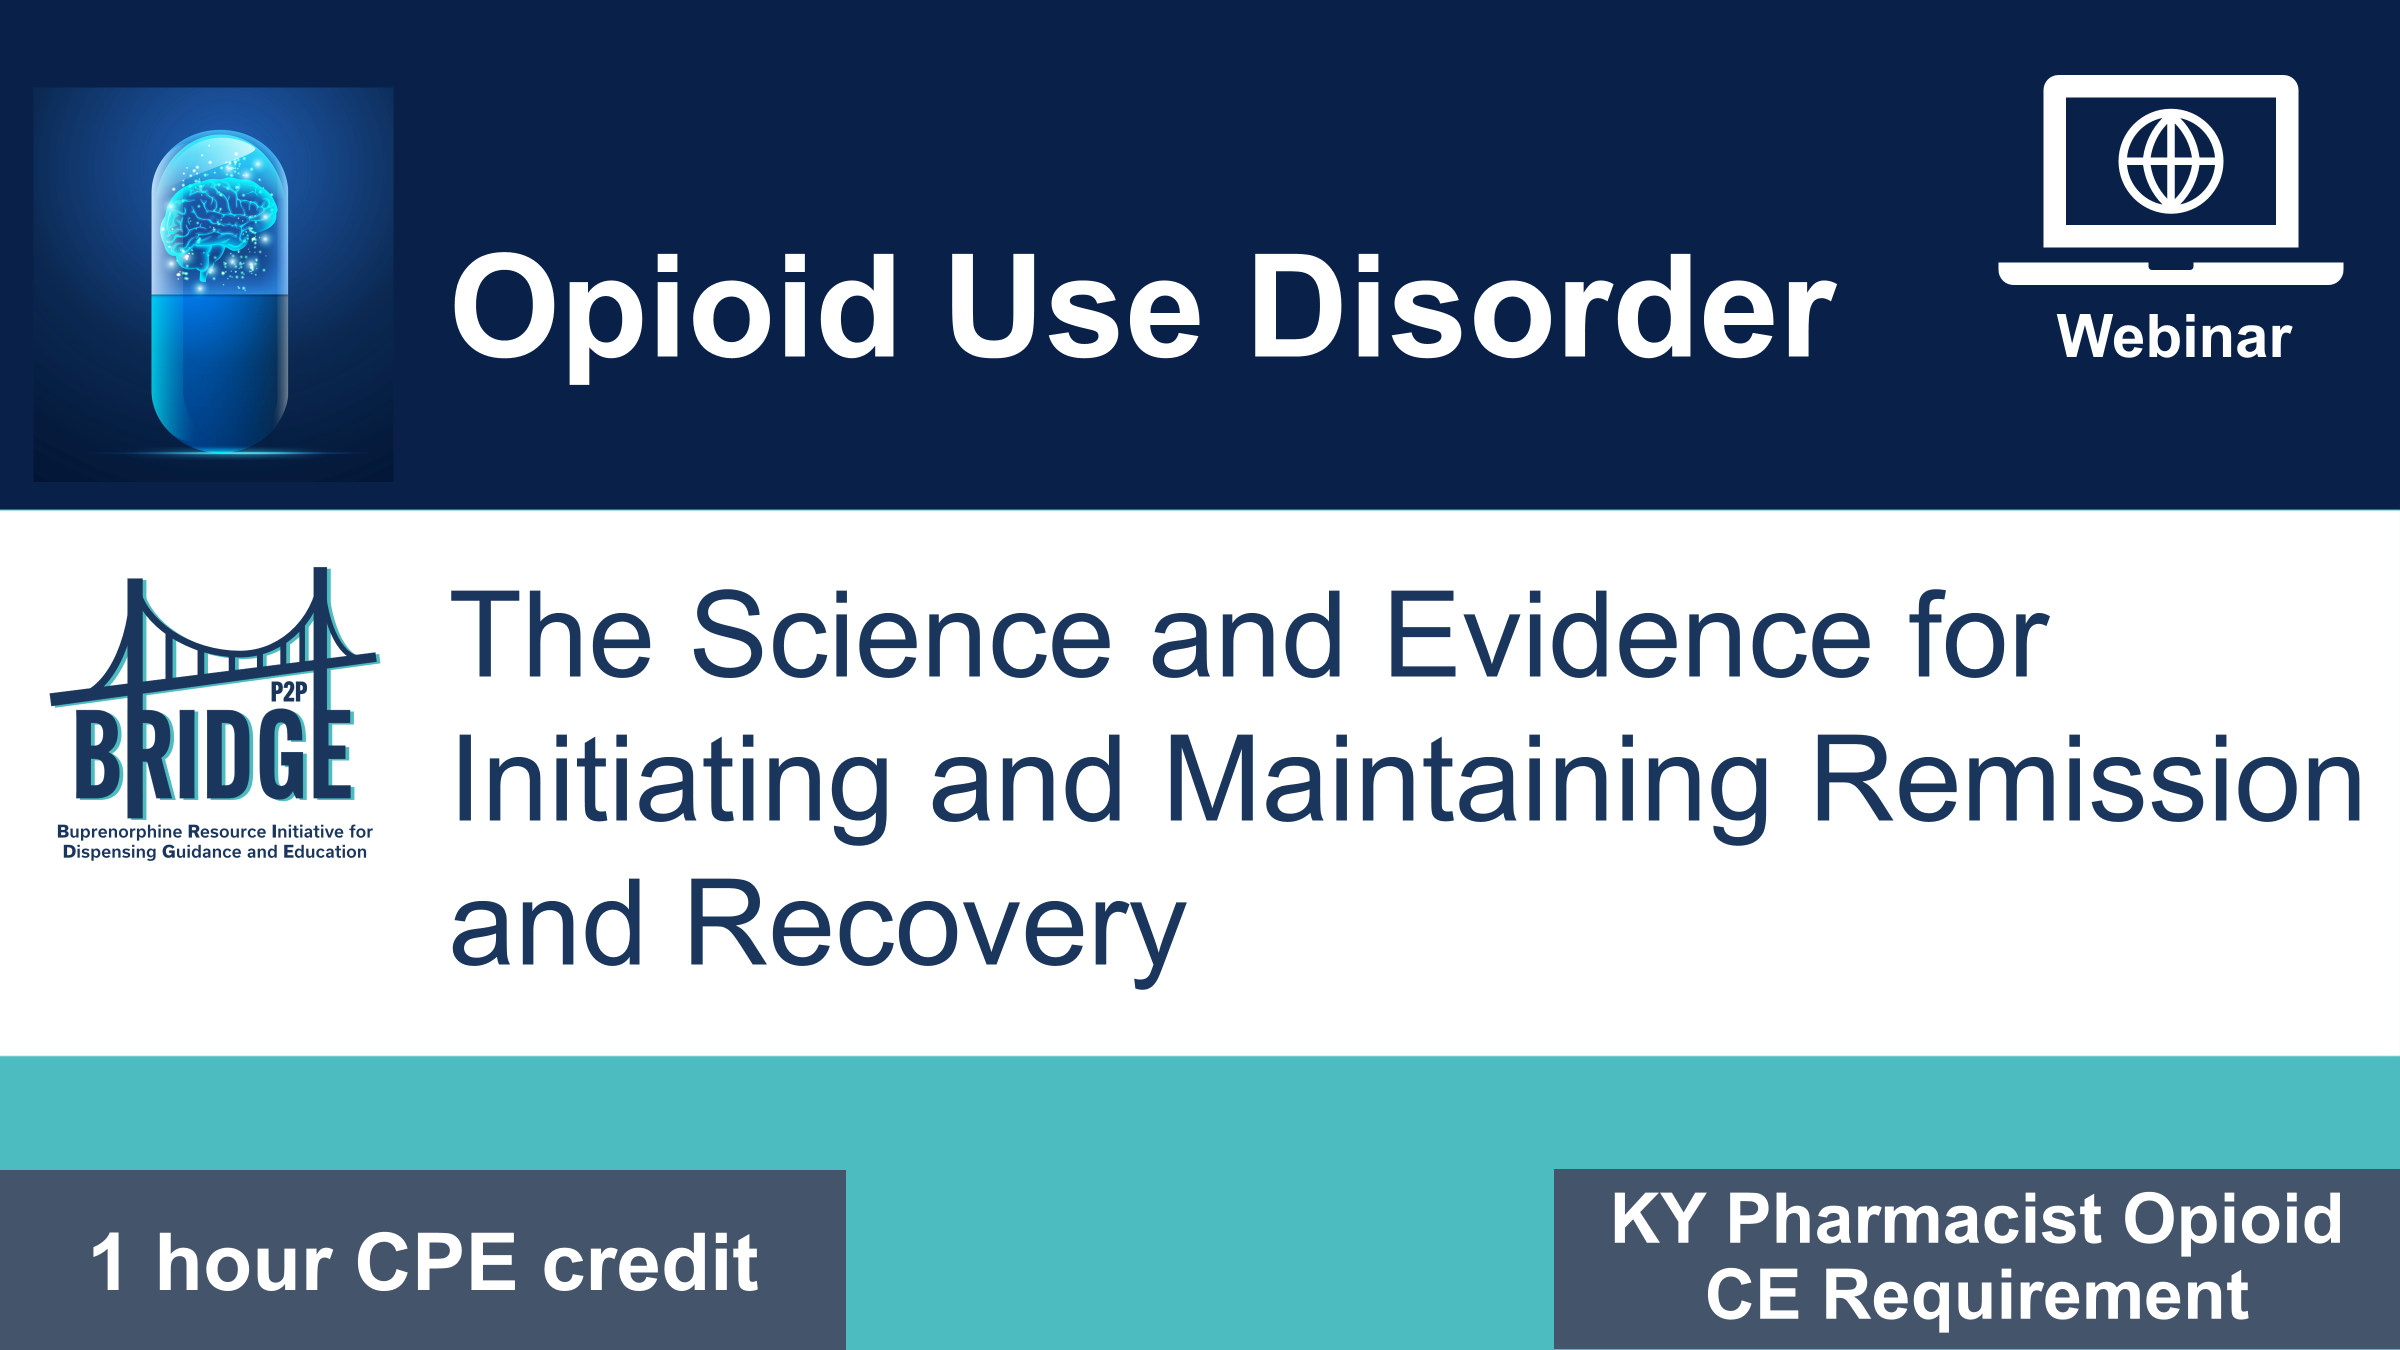 ON DEMAND WEBINAR | Opioid Use Disorder: The Science and Evidence for Initiating and Maintaining Remission and Recovery